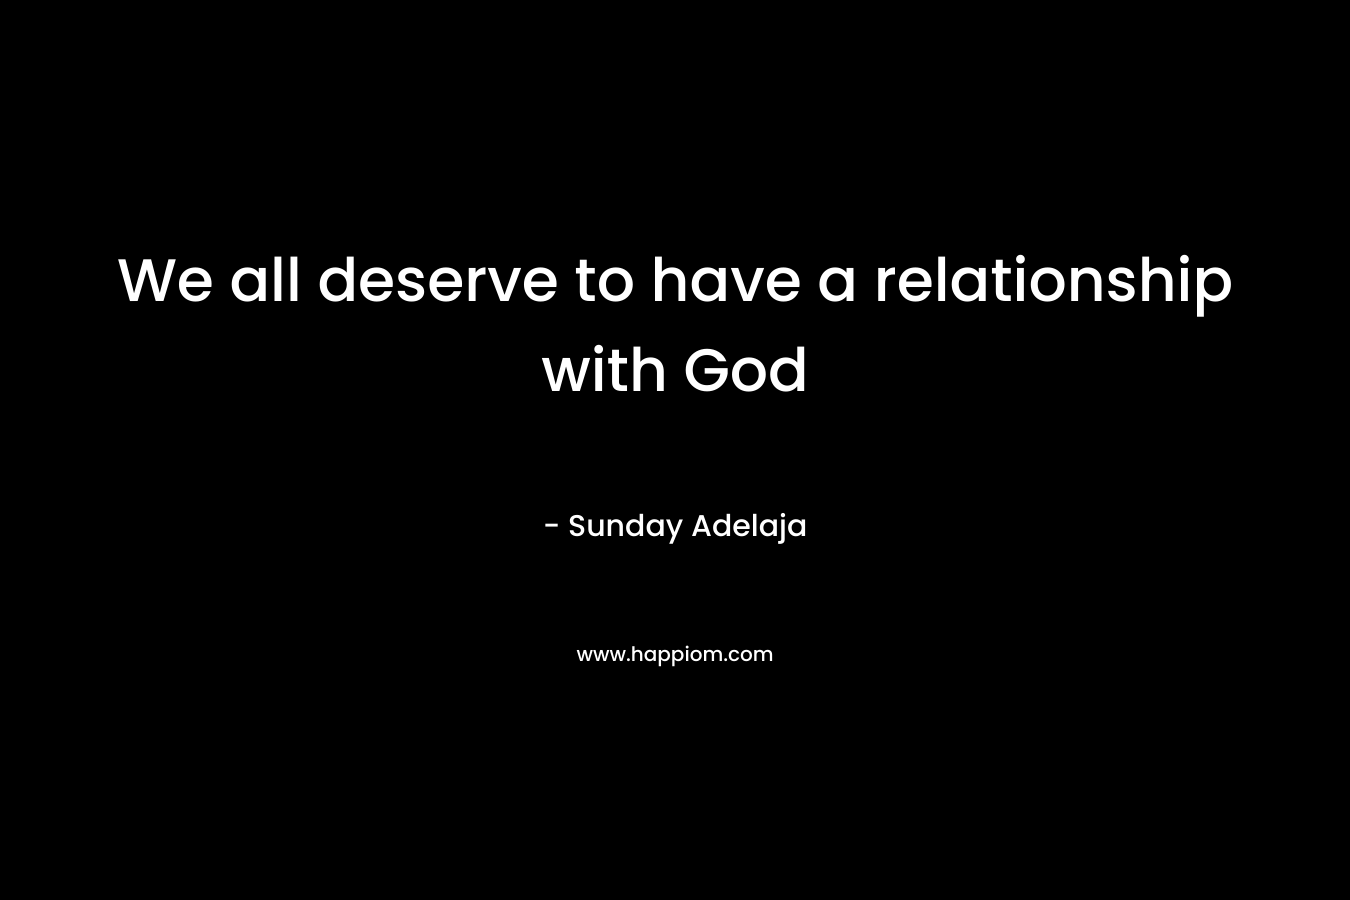 We all deserve to have a relationship with God